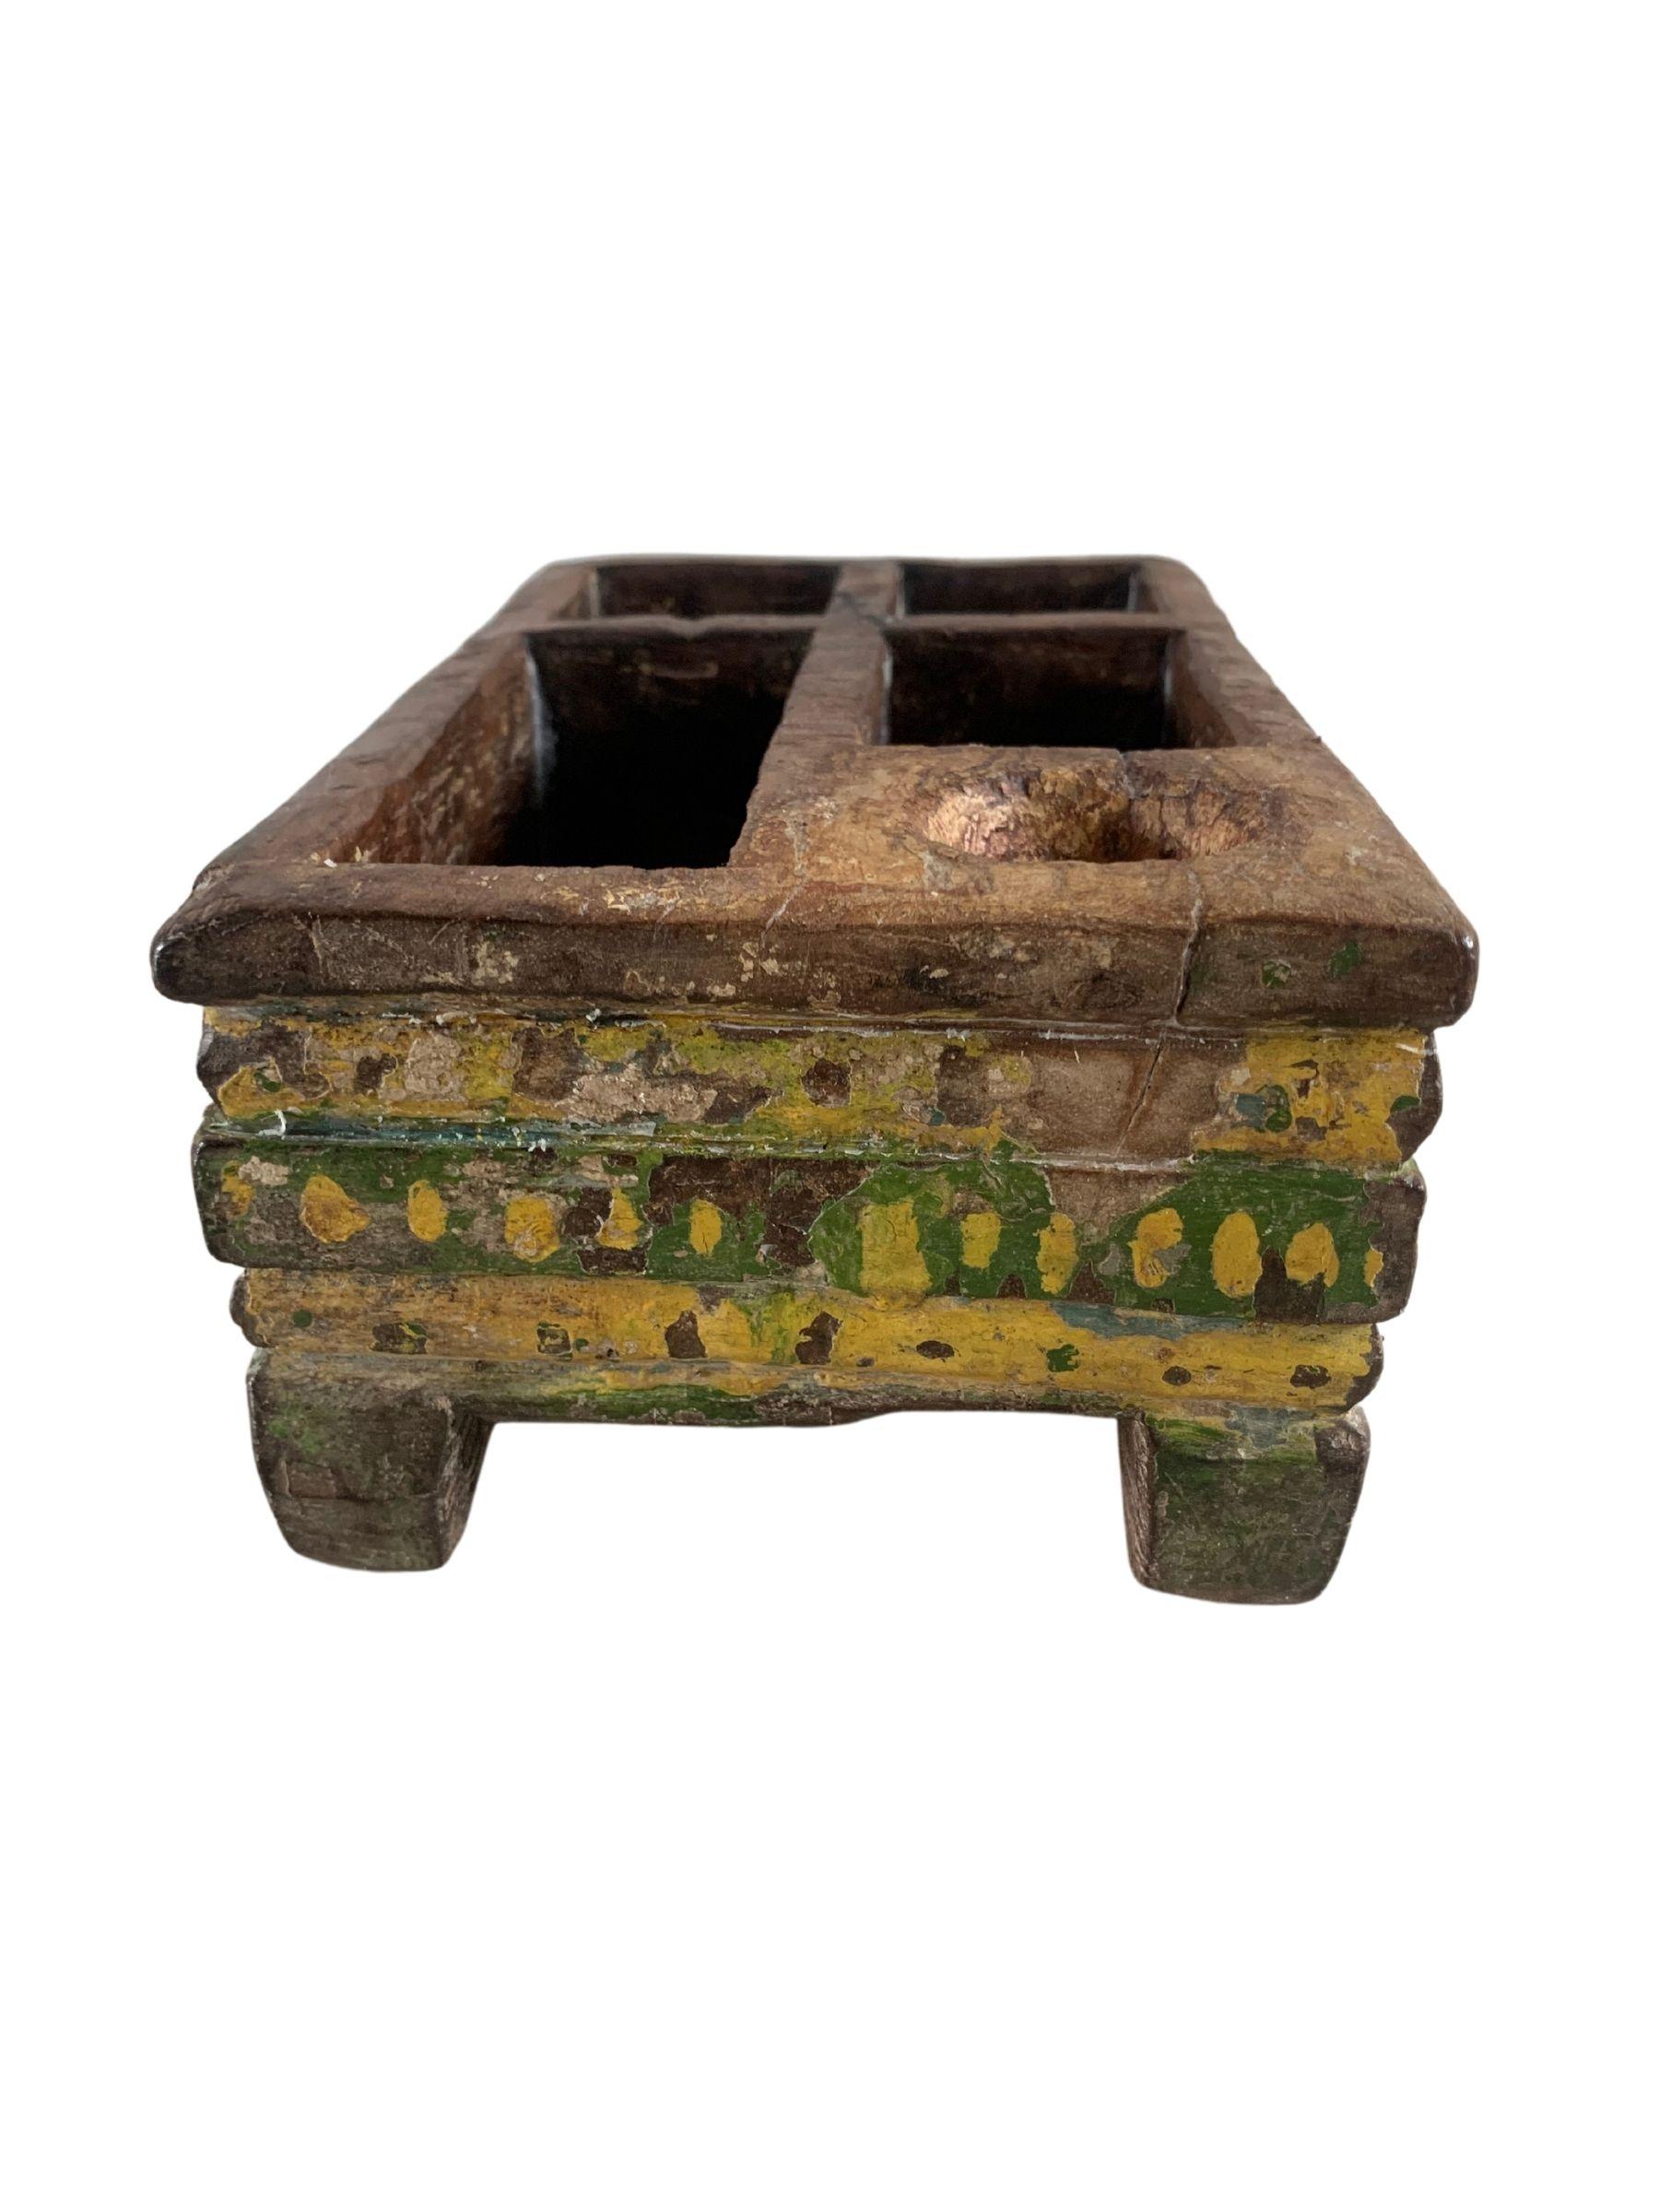 Indonesian Betel Nut Box from Java with Polychromed Finish, Indonesia, c. 1900 For Sale